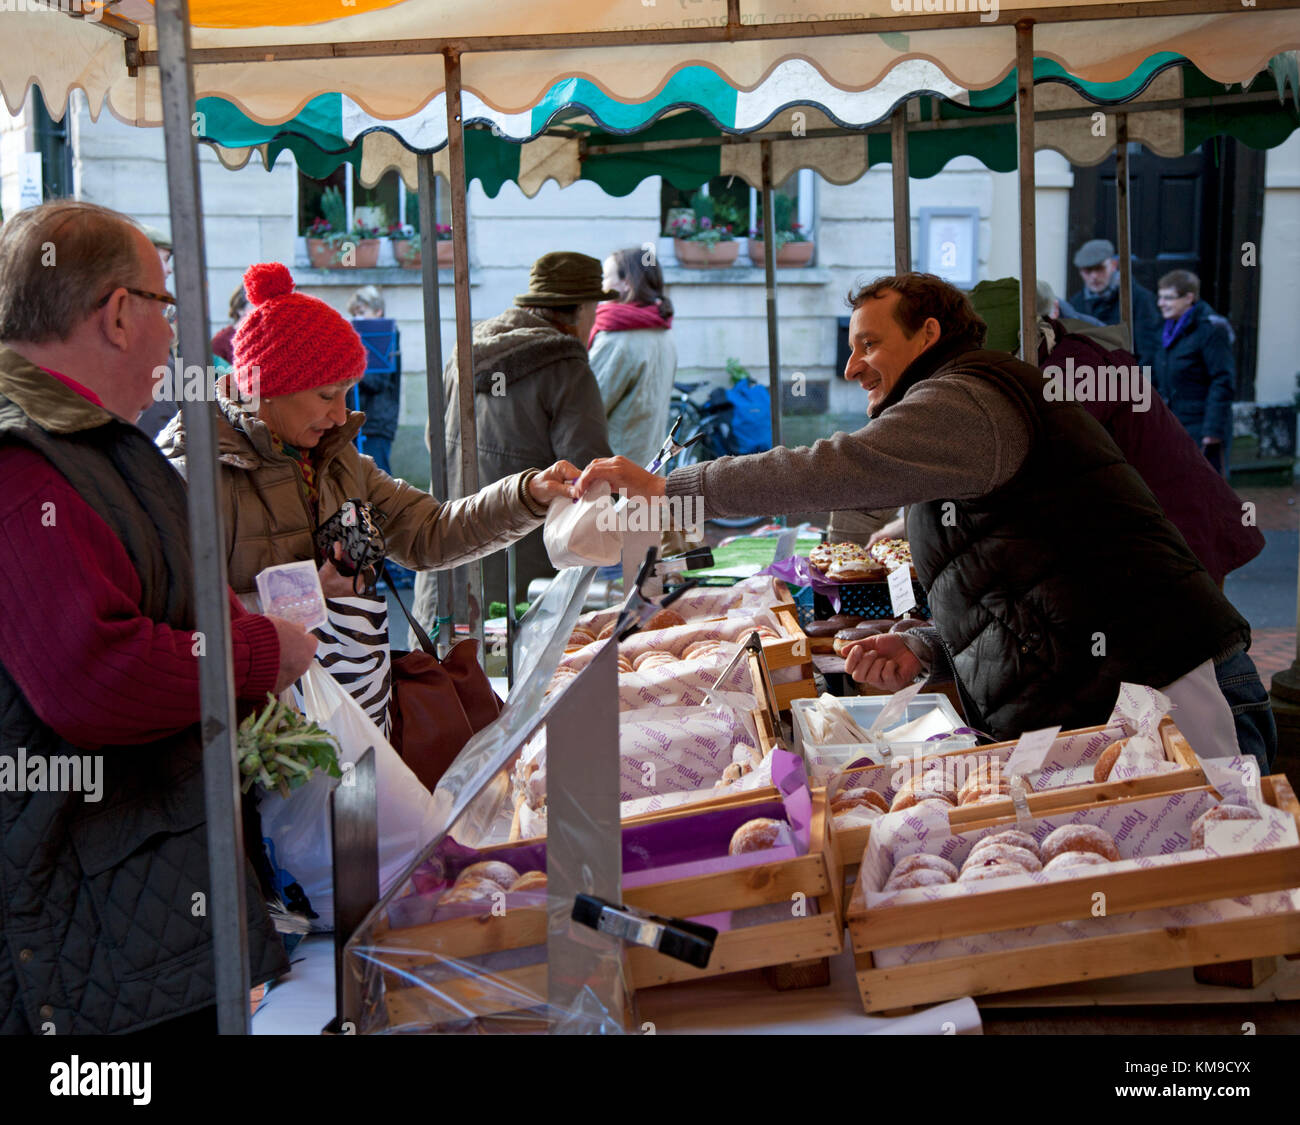 A woman shopper buying donuts at an artisan bakers market stall at the award winning Farmers Market in Stroud, Gloucestershire, UK Stock Photo